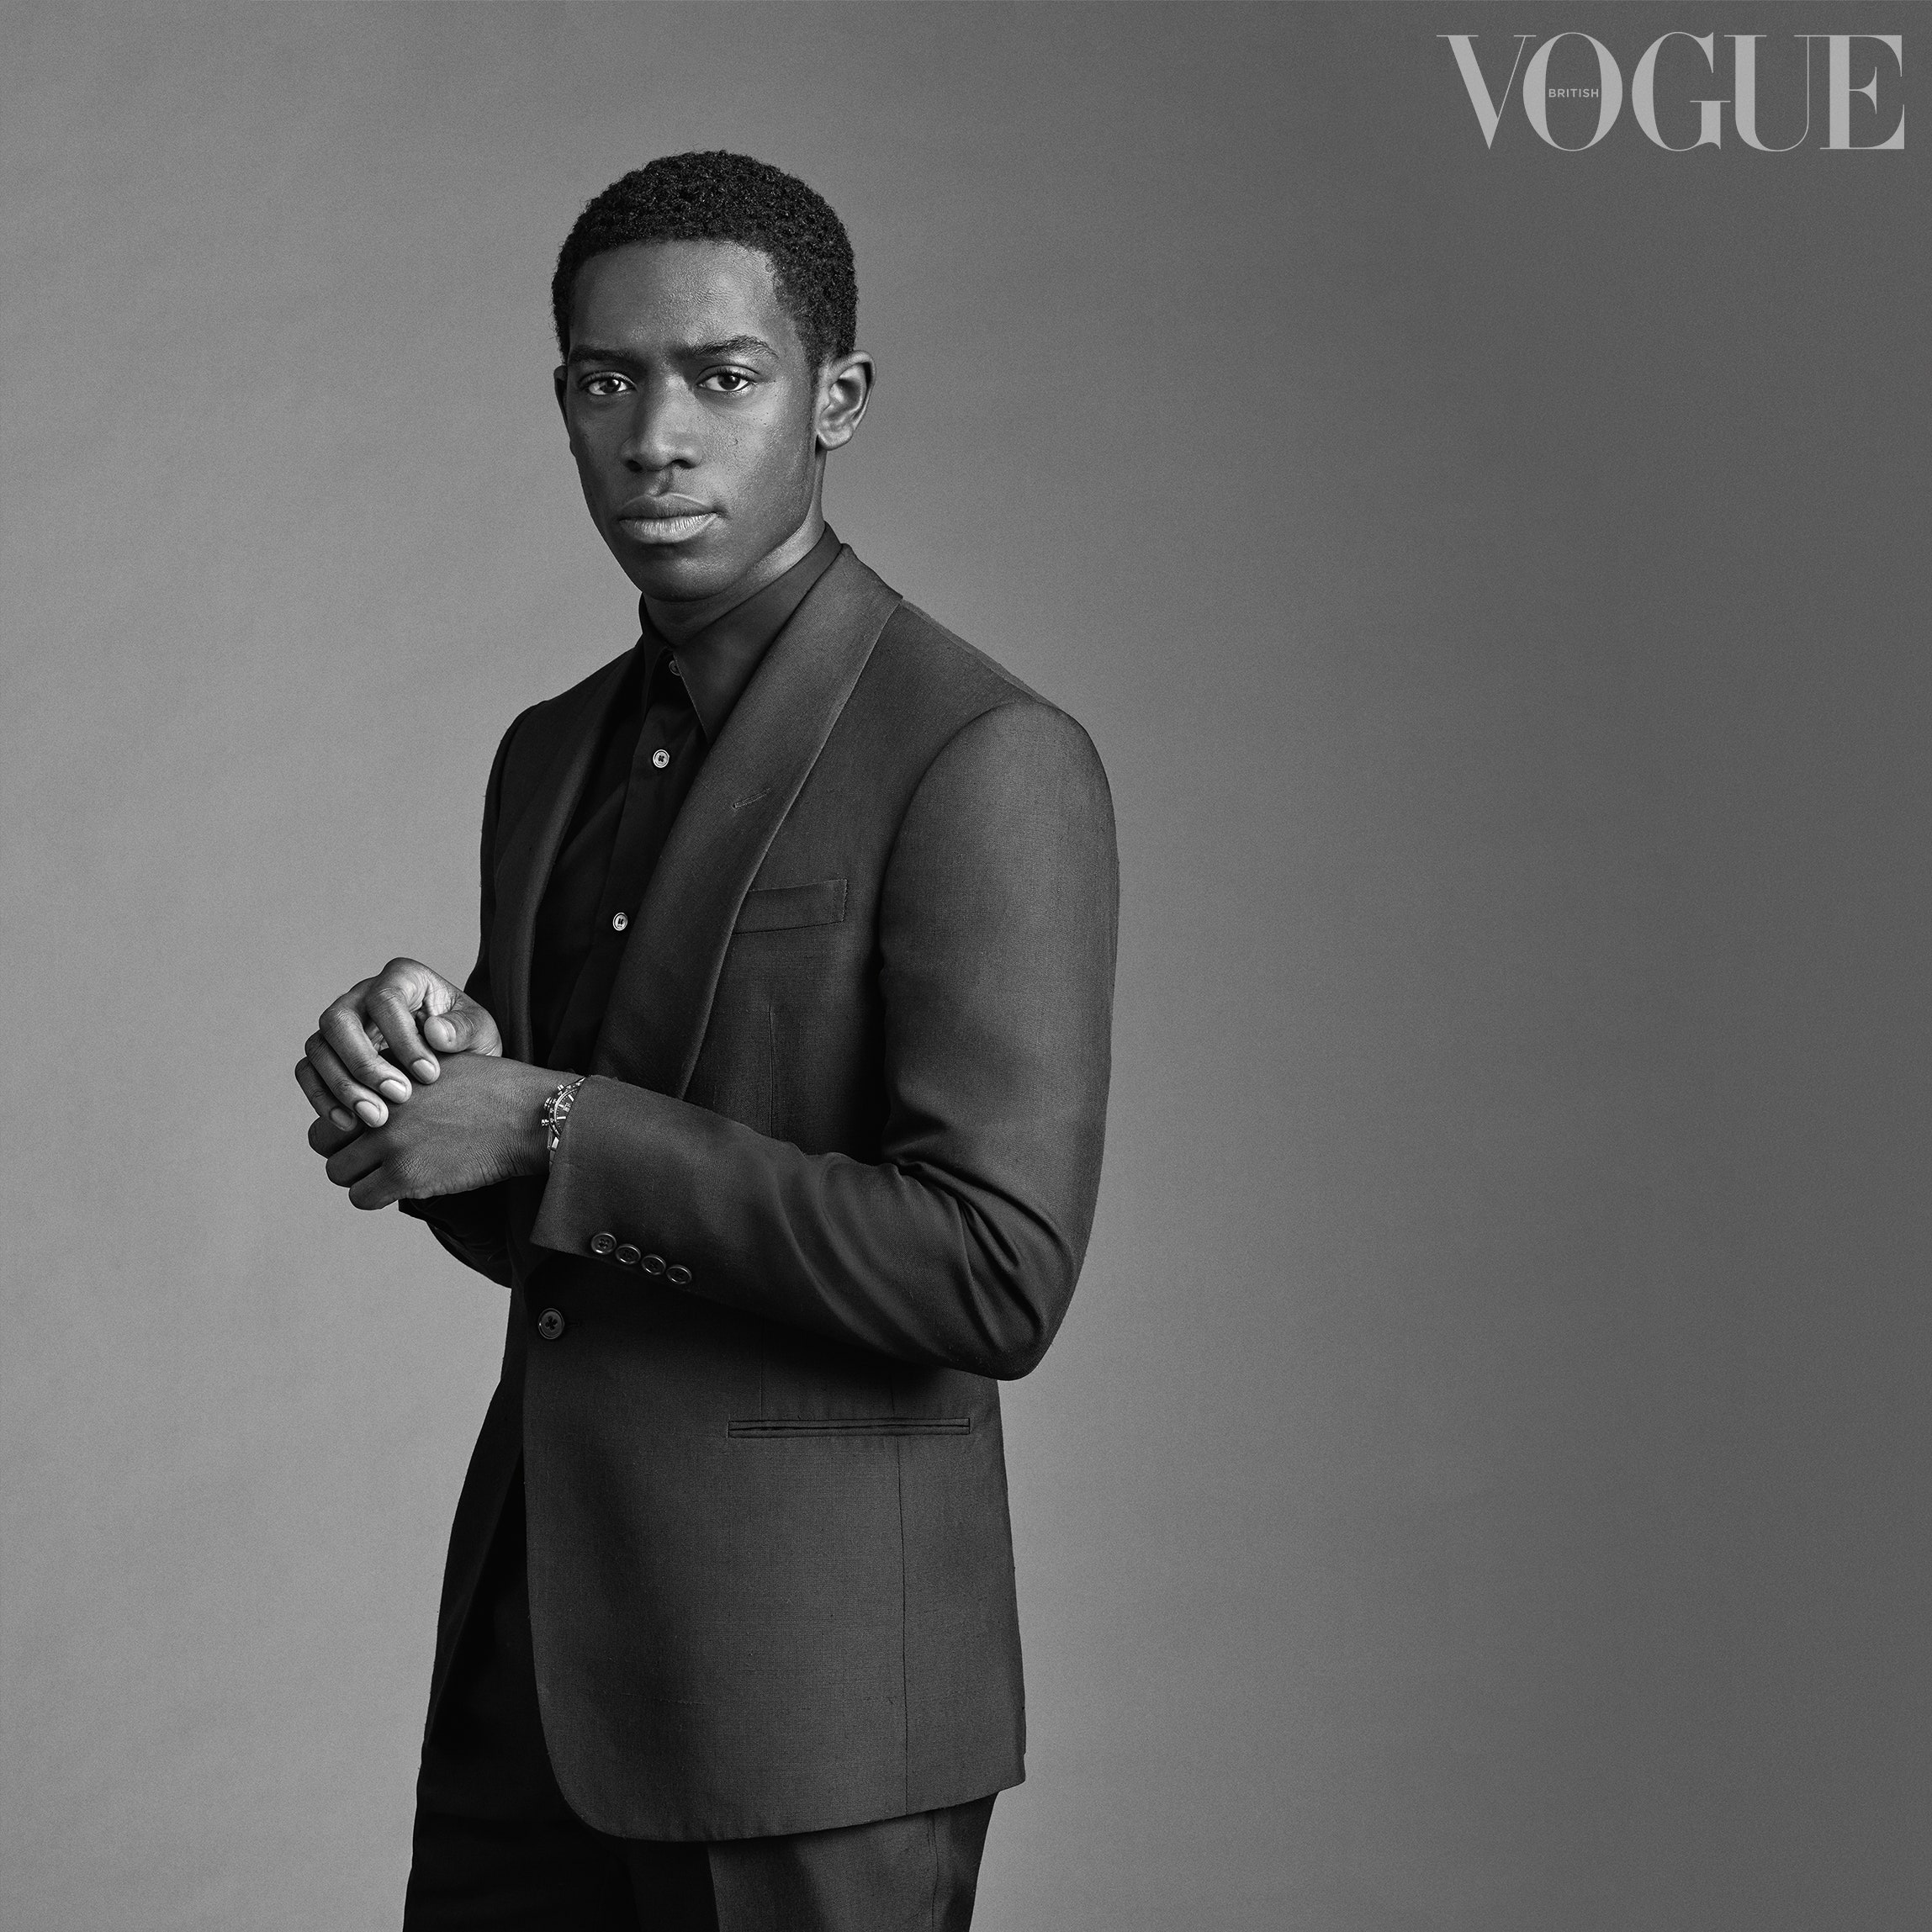 Snowfall Star Damson Idris Is Set To Lead Netflix's Outside the Wire With Anthony Mackie And Emily Beecham